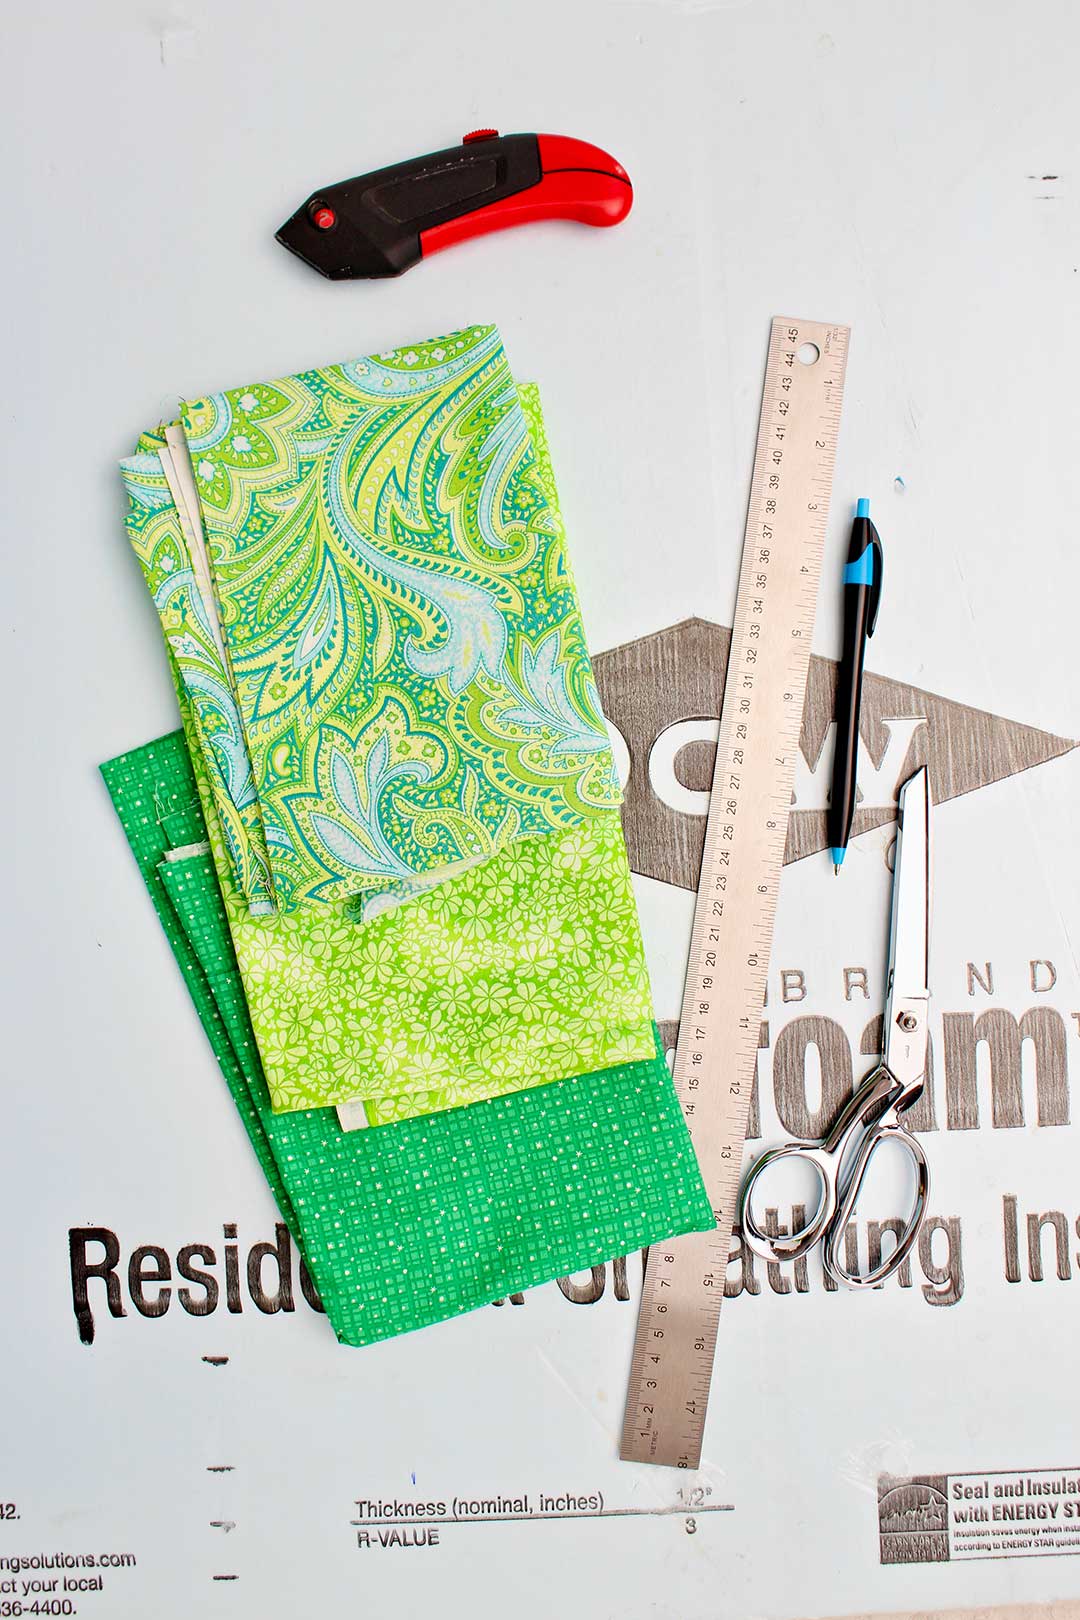 Supplies for fabric bulletin boards with foam core. Foam core, three different patterned green fabric, box cutter, pen, scissors and ruler.